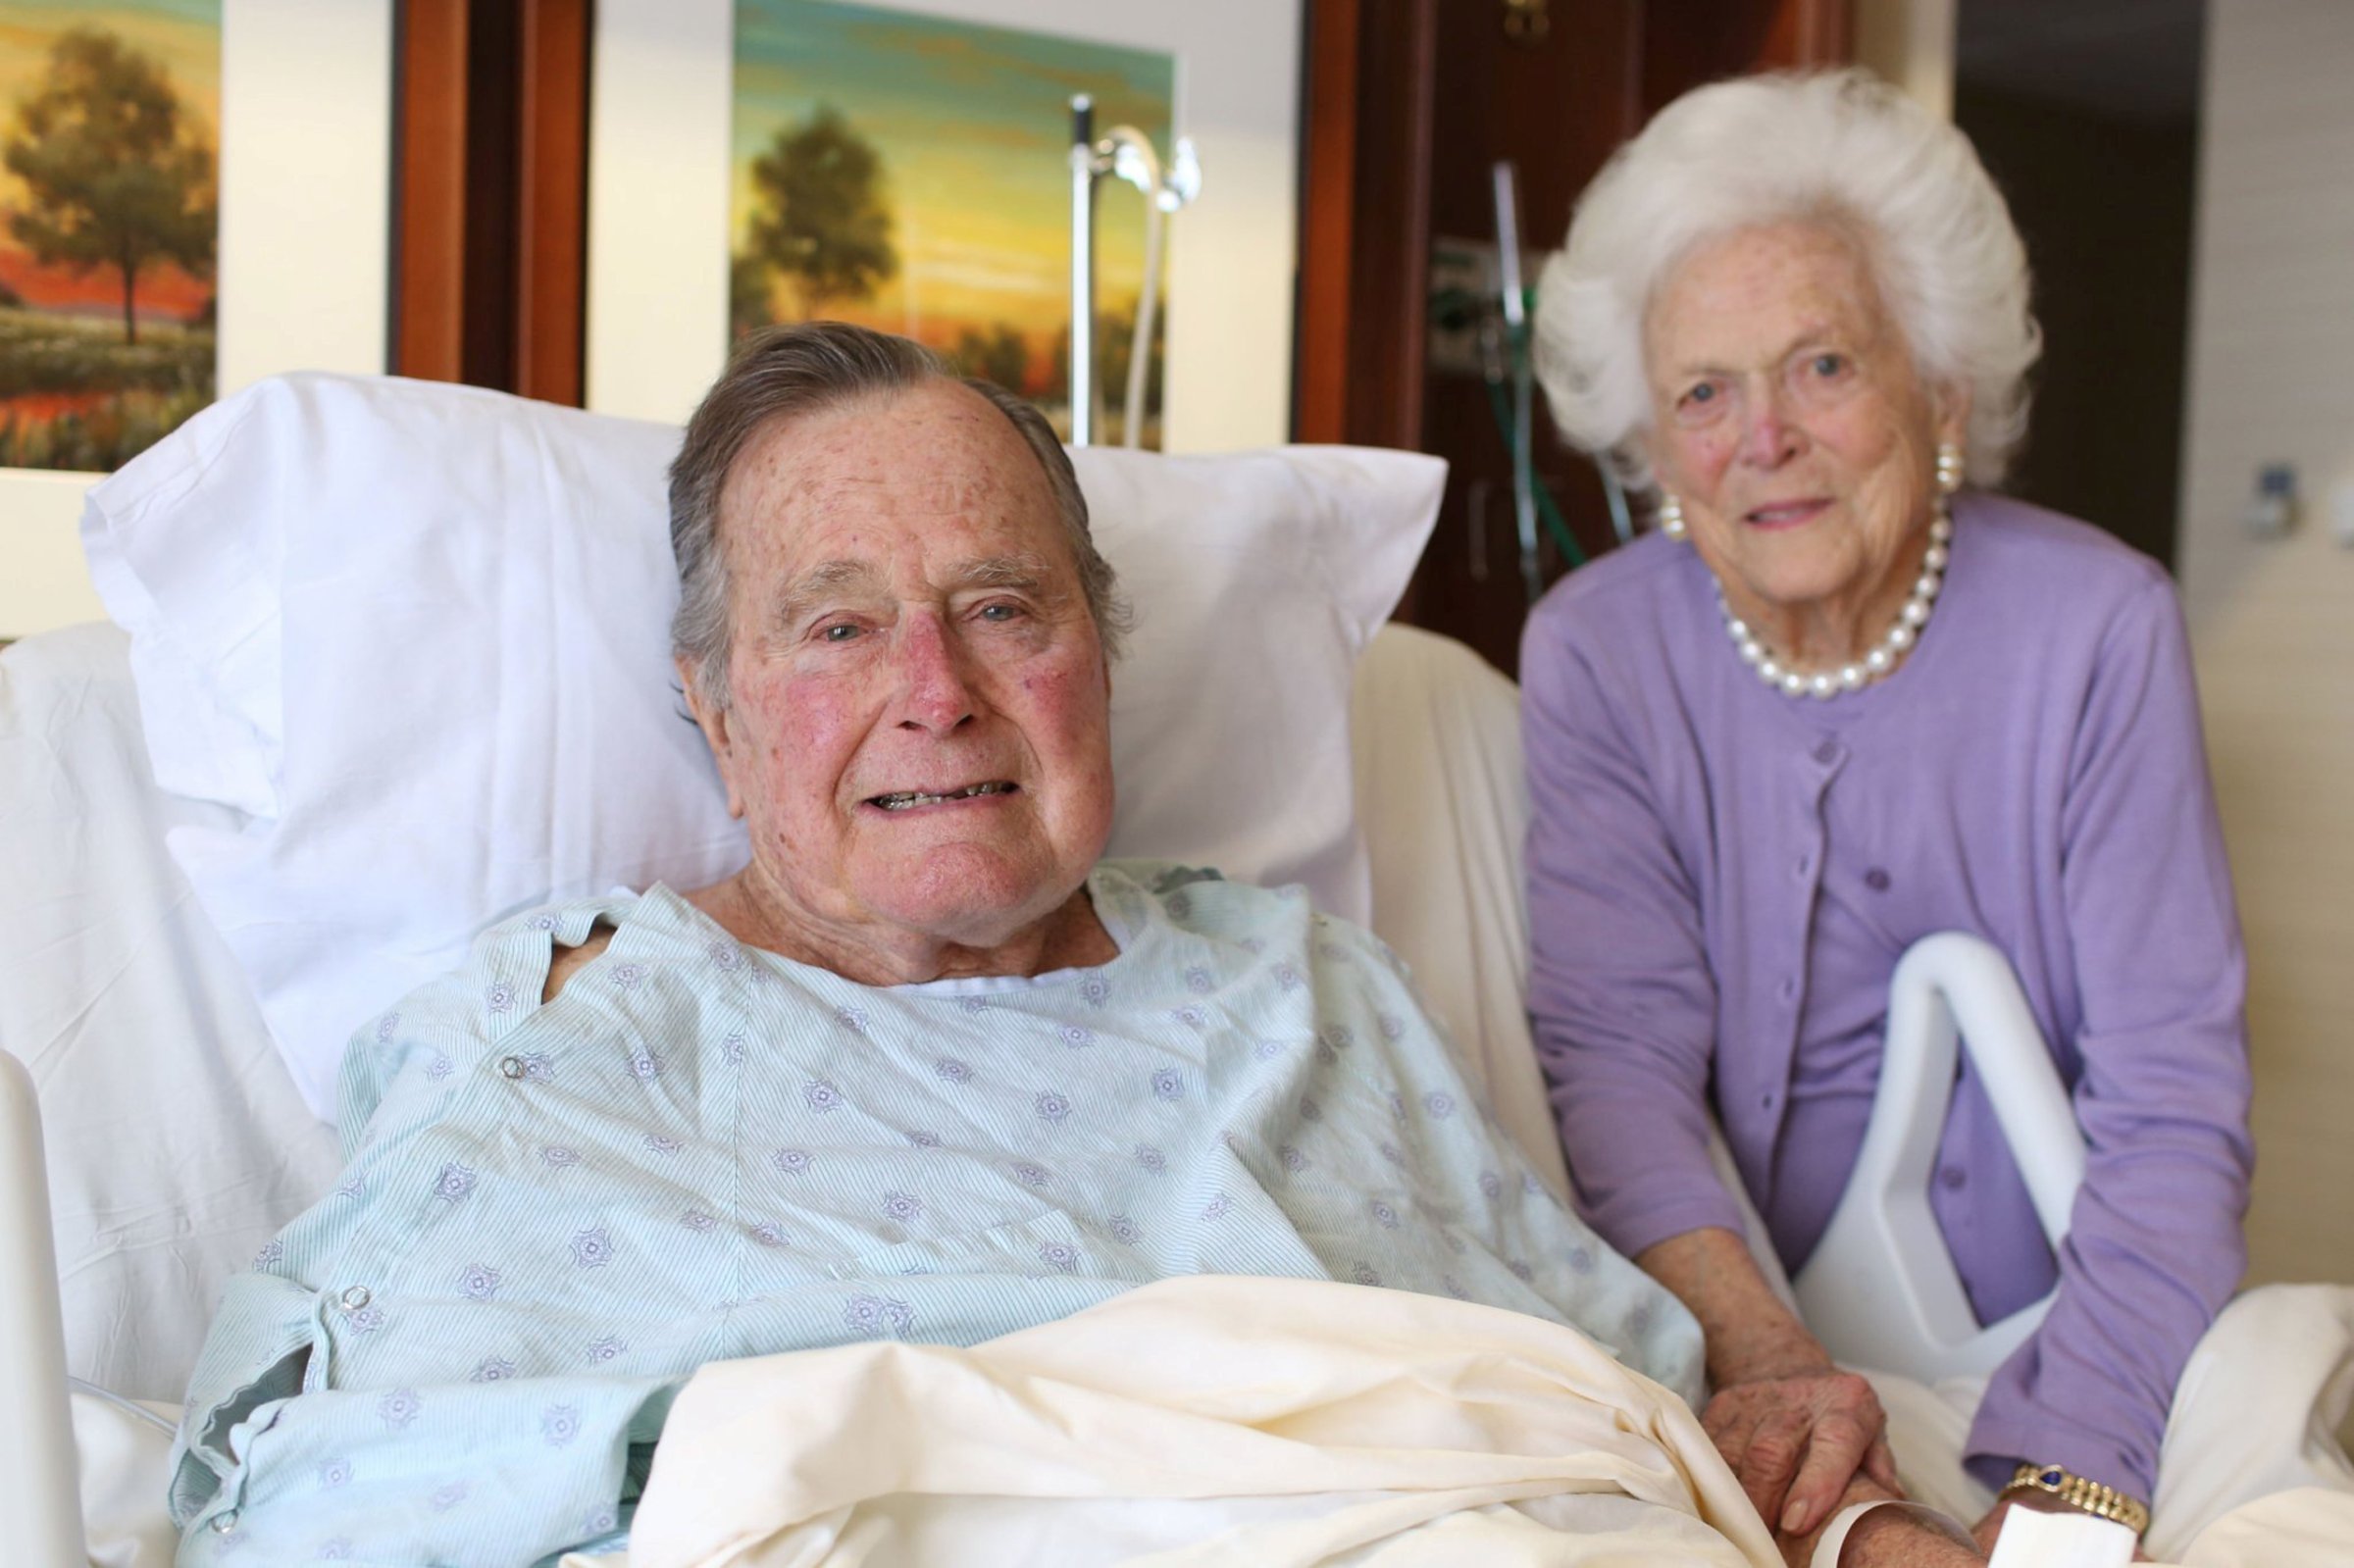 Former President George H.W. Bush and his wife Barbara Bush are pictured in Houston Methodist Hospital in Houston, Texas, U.S. in this January 23, 2017 handout photo. Jim McGrath via Twitter/Handout via REUTERS ATTENTION EDITORS - THIS IMAGE WAS PROVIDED BY A THIRD PARTY. EDITORIAL USE ONLY